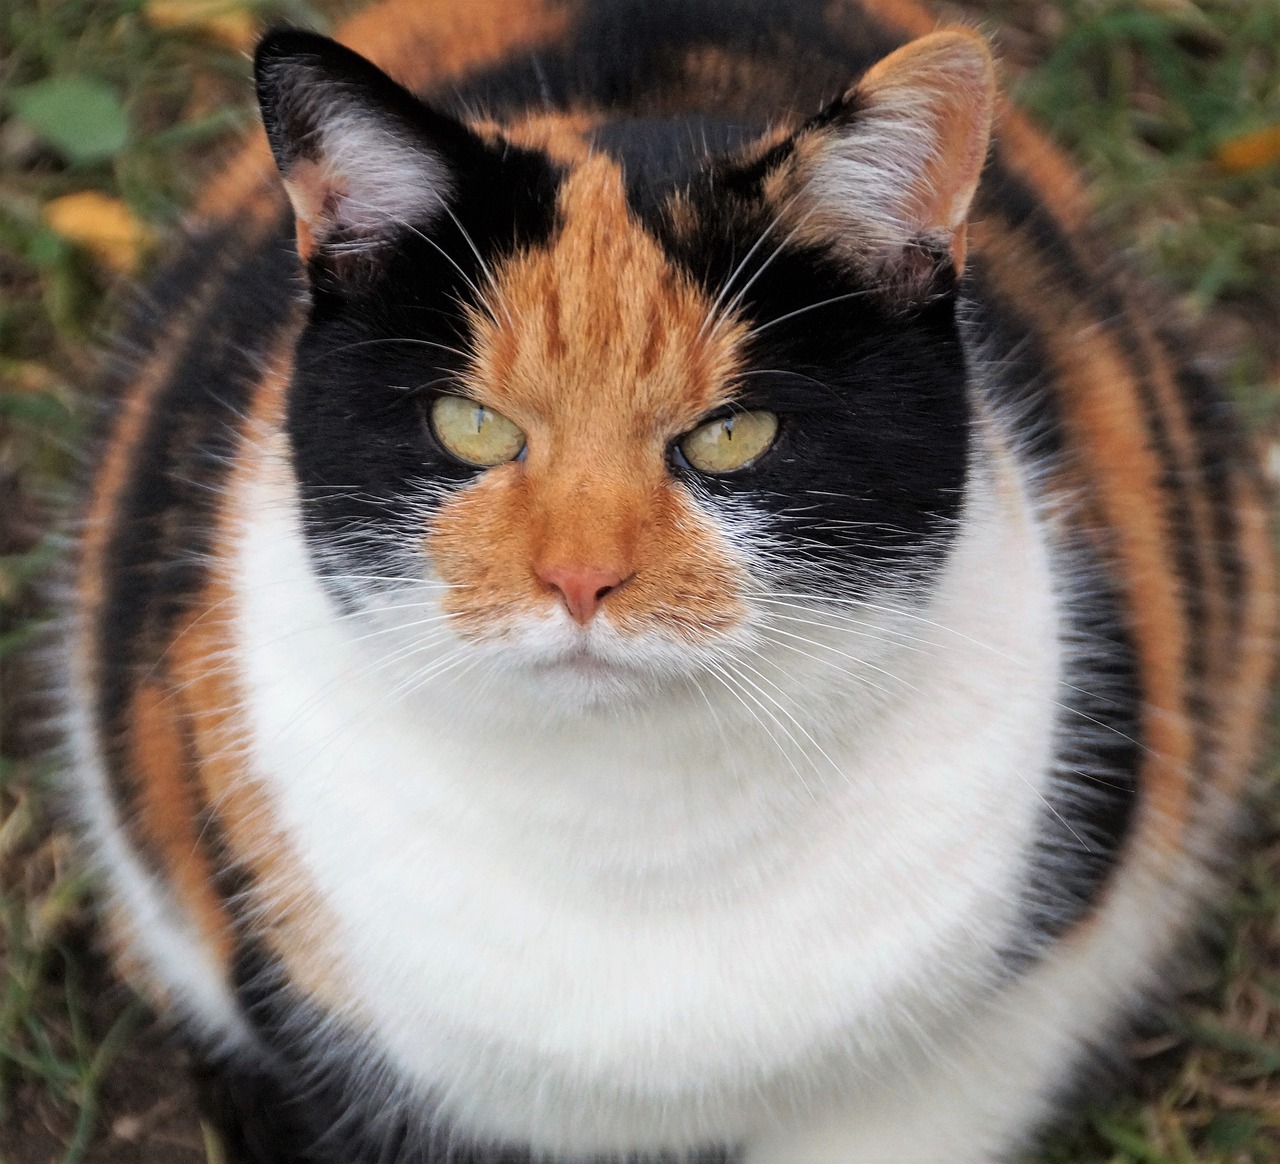 a calico cat sitting in the grass looking at the camera, a portrait, flickr, morbidly obese, very accurate photo